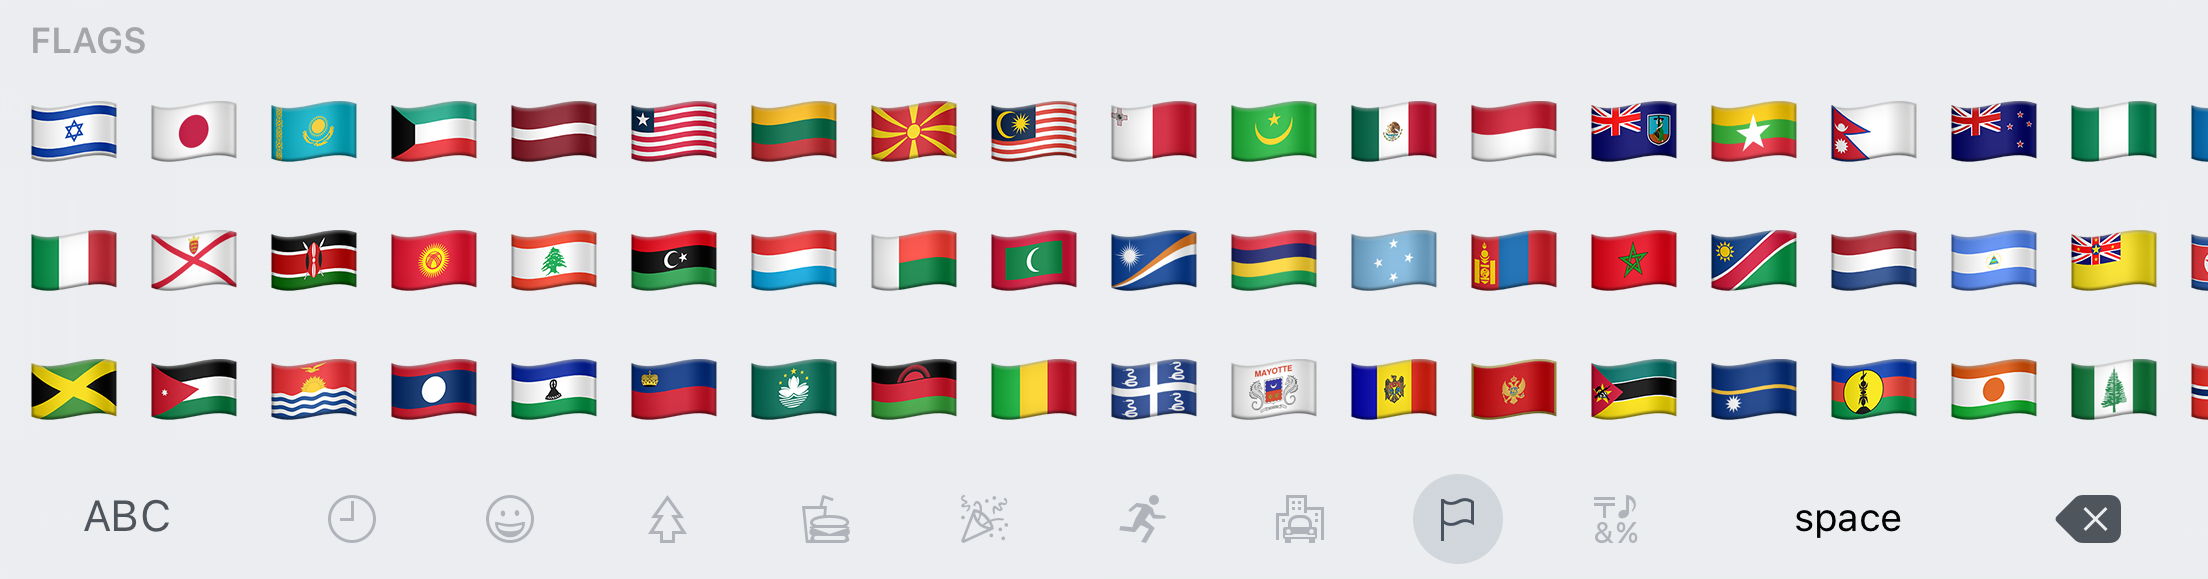 download emoji flags android